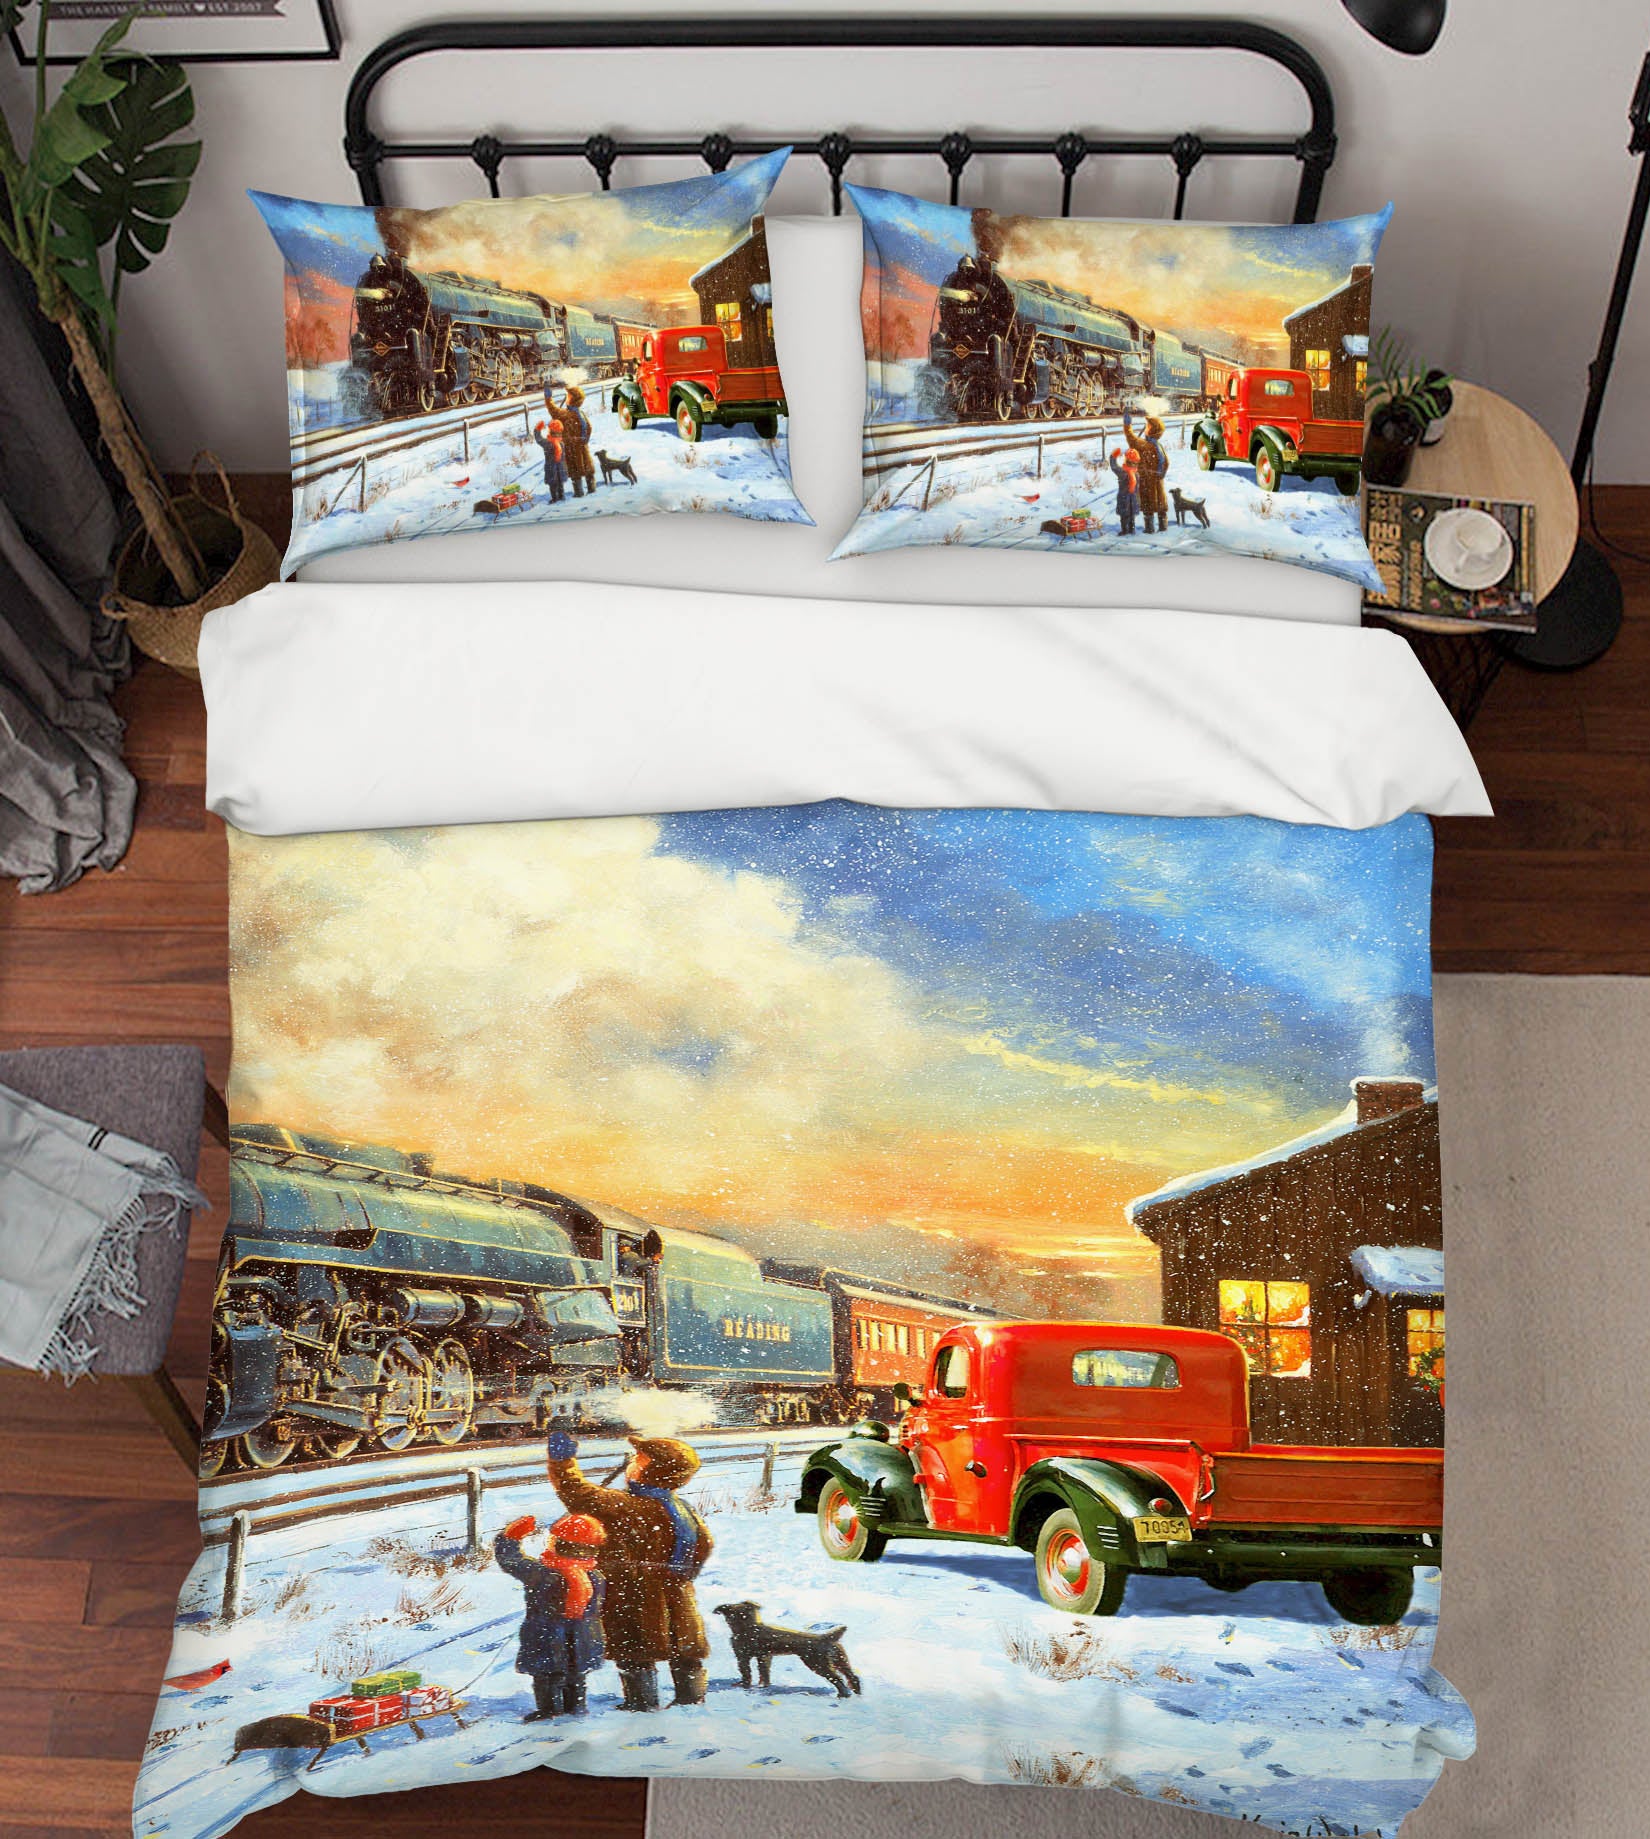 3D Snow Train 12524 Kevin Walsh Bedding Bed Pillowcases Quilt